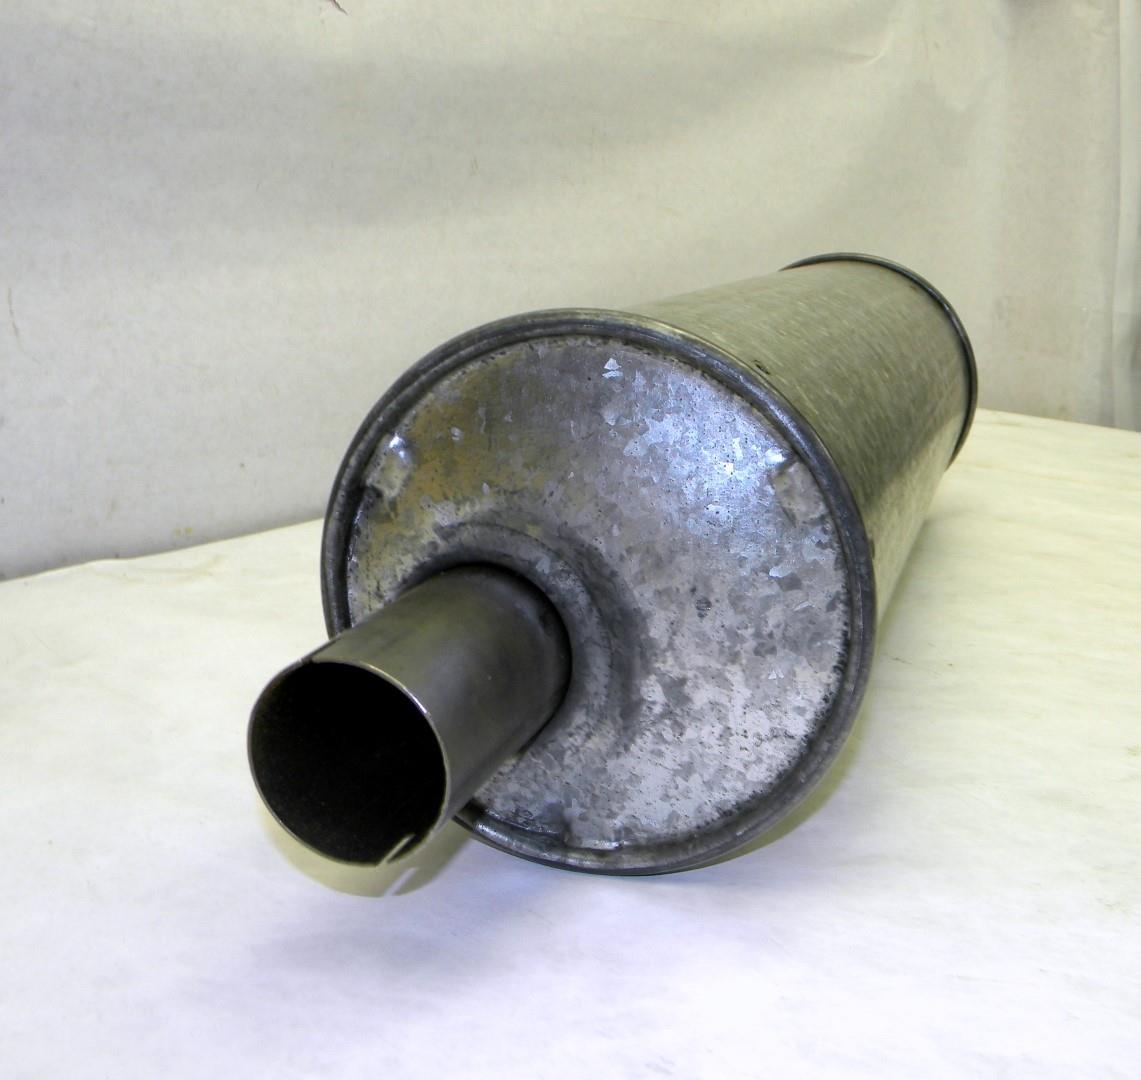 SP-1490 | 2990-00-588-4131Walker Exhaust Muffler 2 Inch Inlet and Outlet, Unknown Application. NOS.  (4).JPG